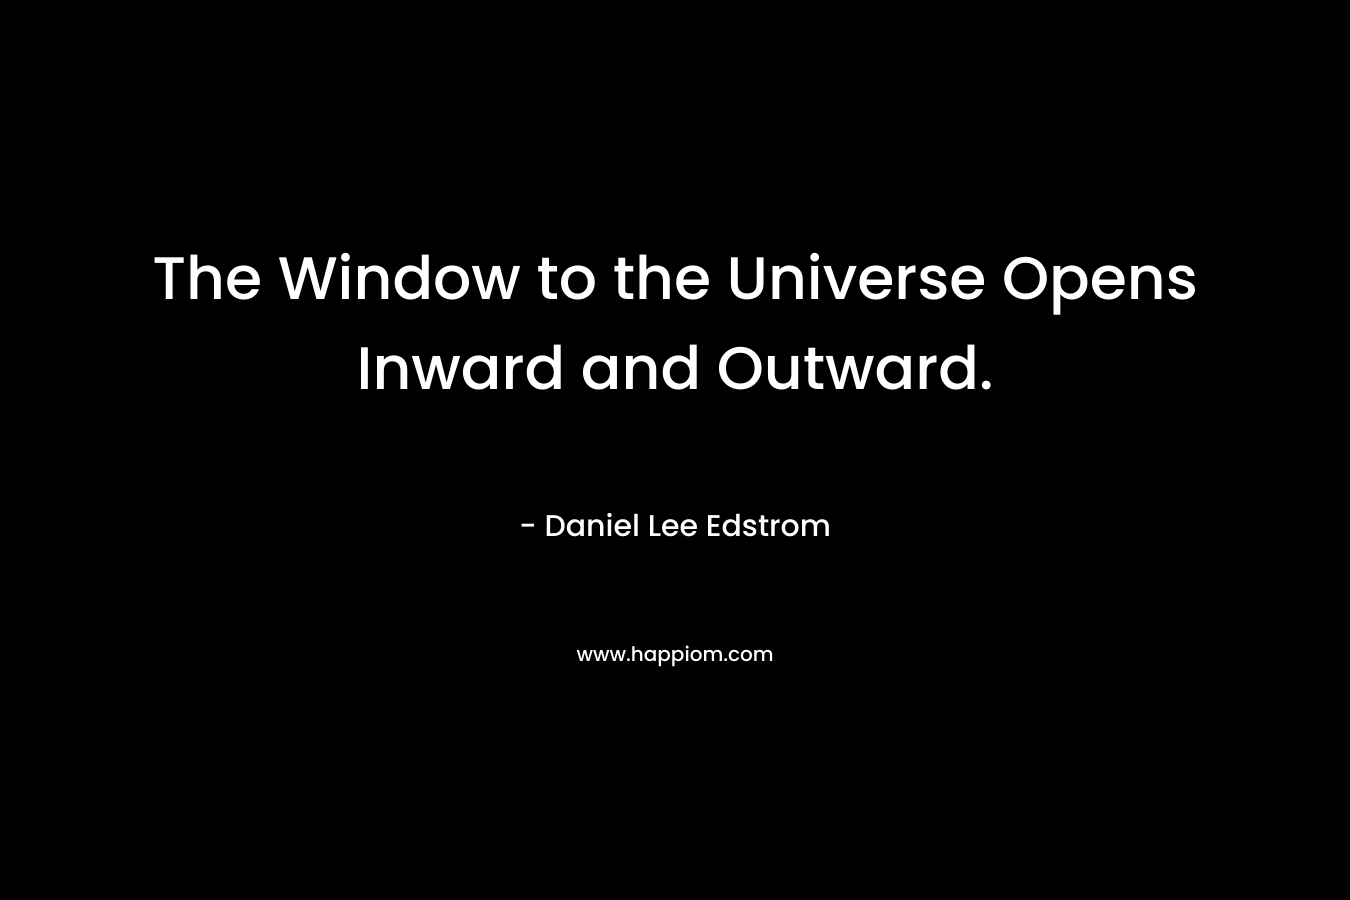 The Window to the Universe Opens Inward and Outward.